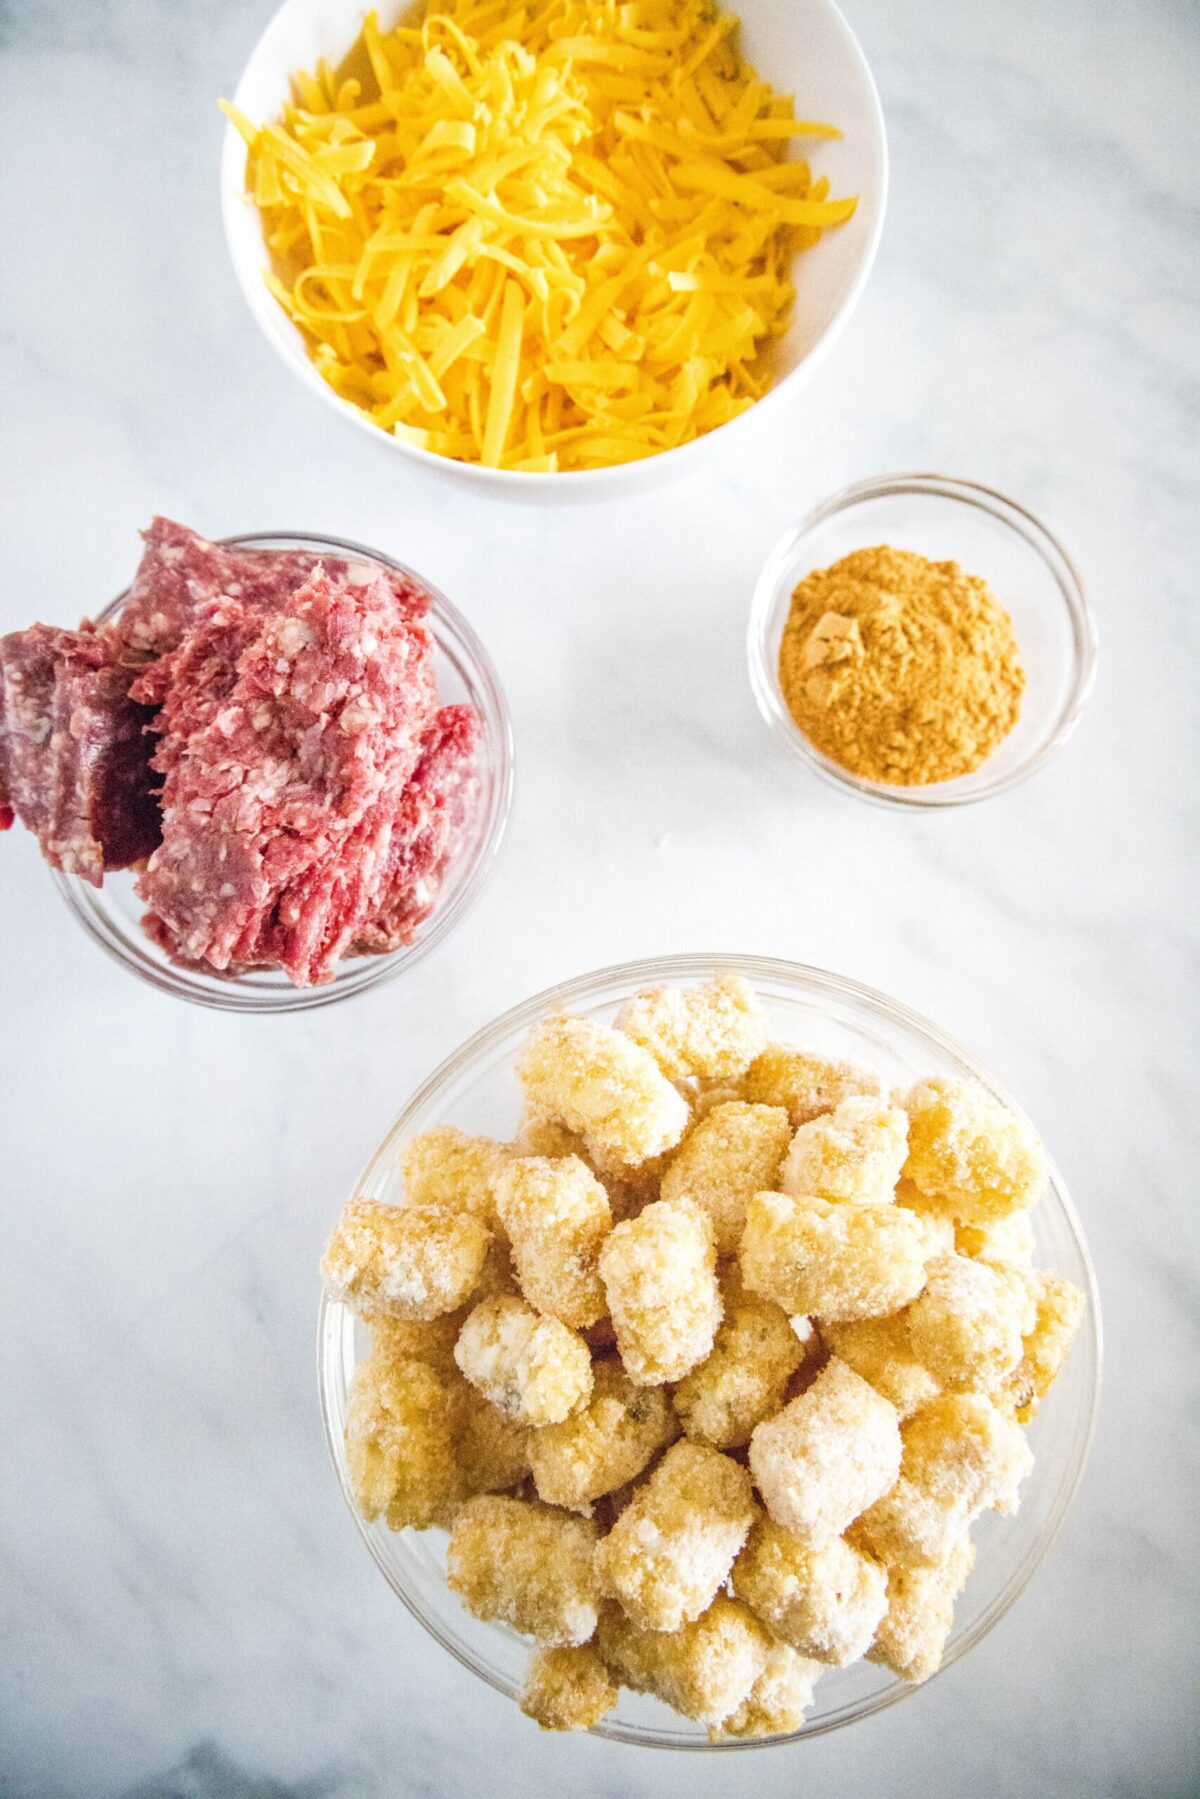 Overhead view of the ingredients needed for totchos: a bowl of frozen tater tots, a bowl of raw ground beef, a bowl of shredded cheddar cheese, and a bowl of taco seasoning